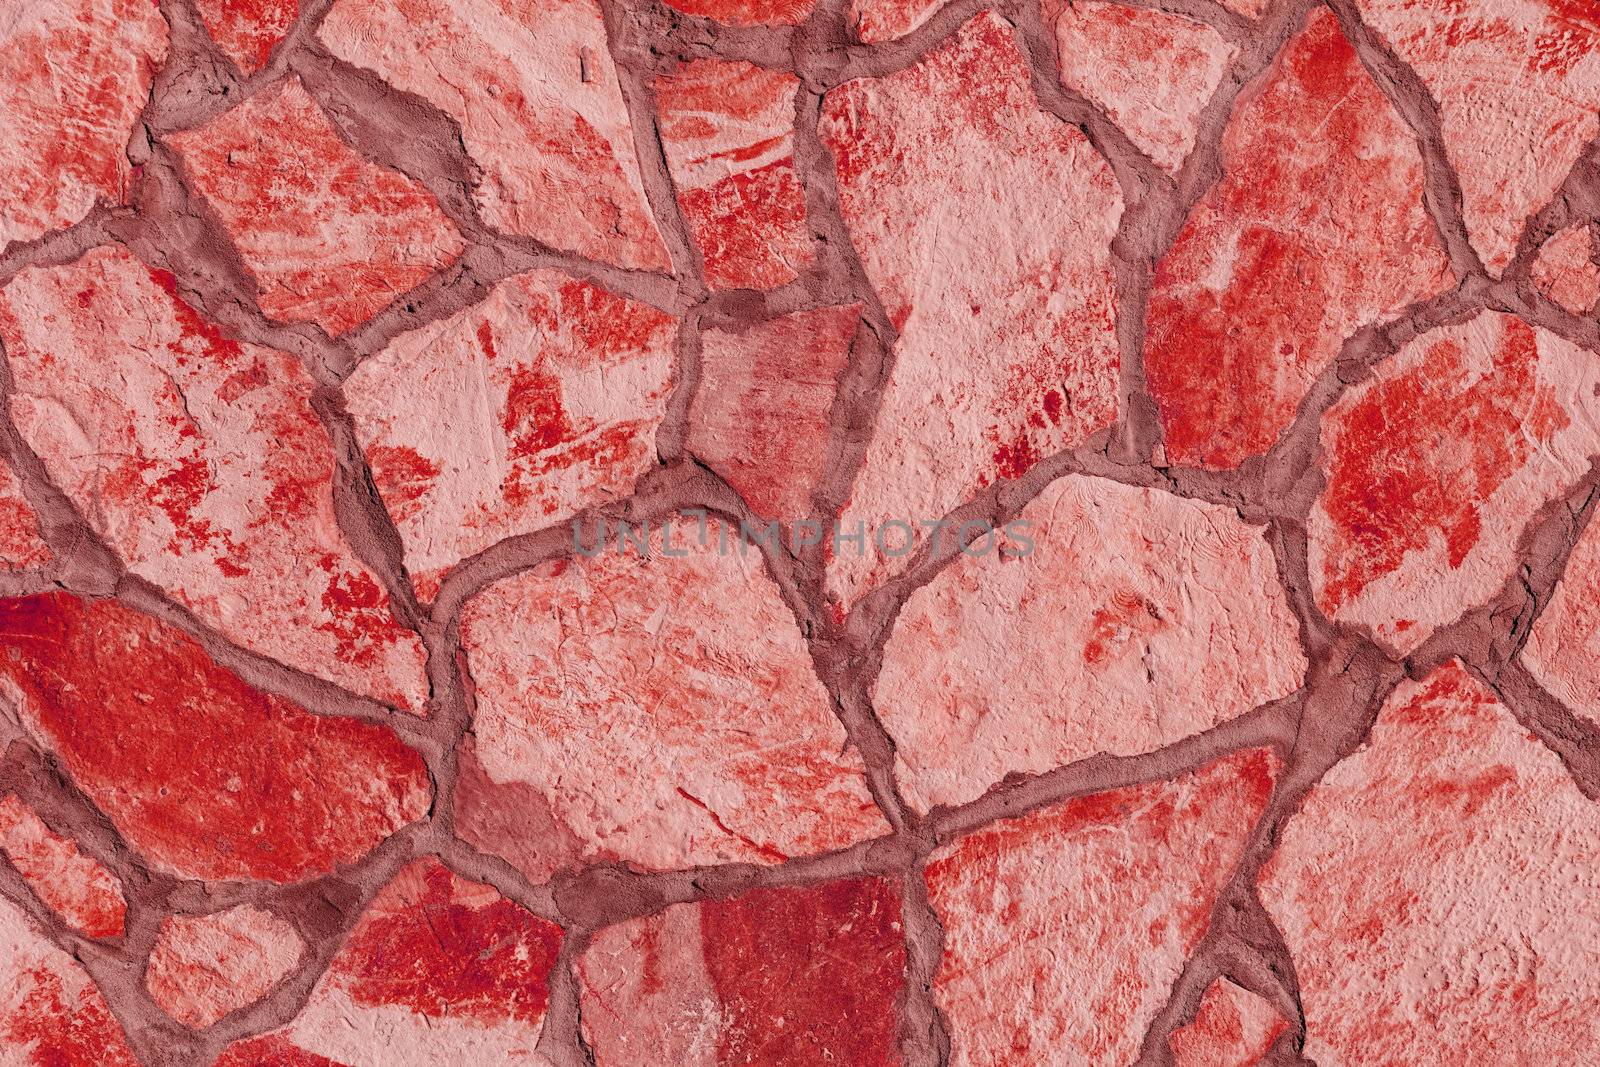 Background of a large stone wall texture (red)